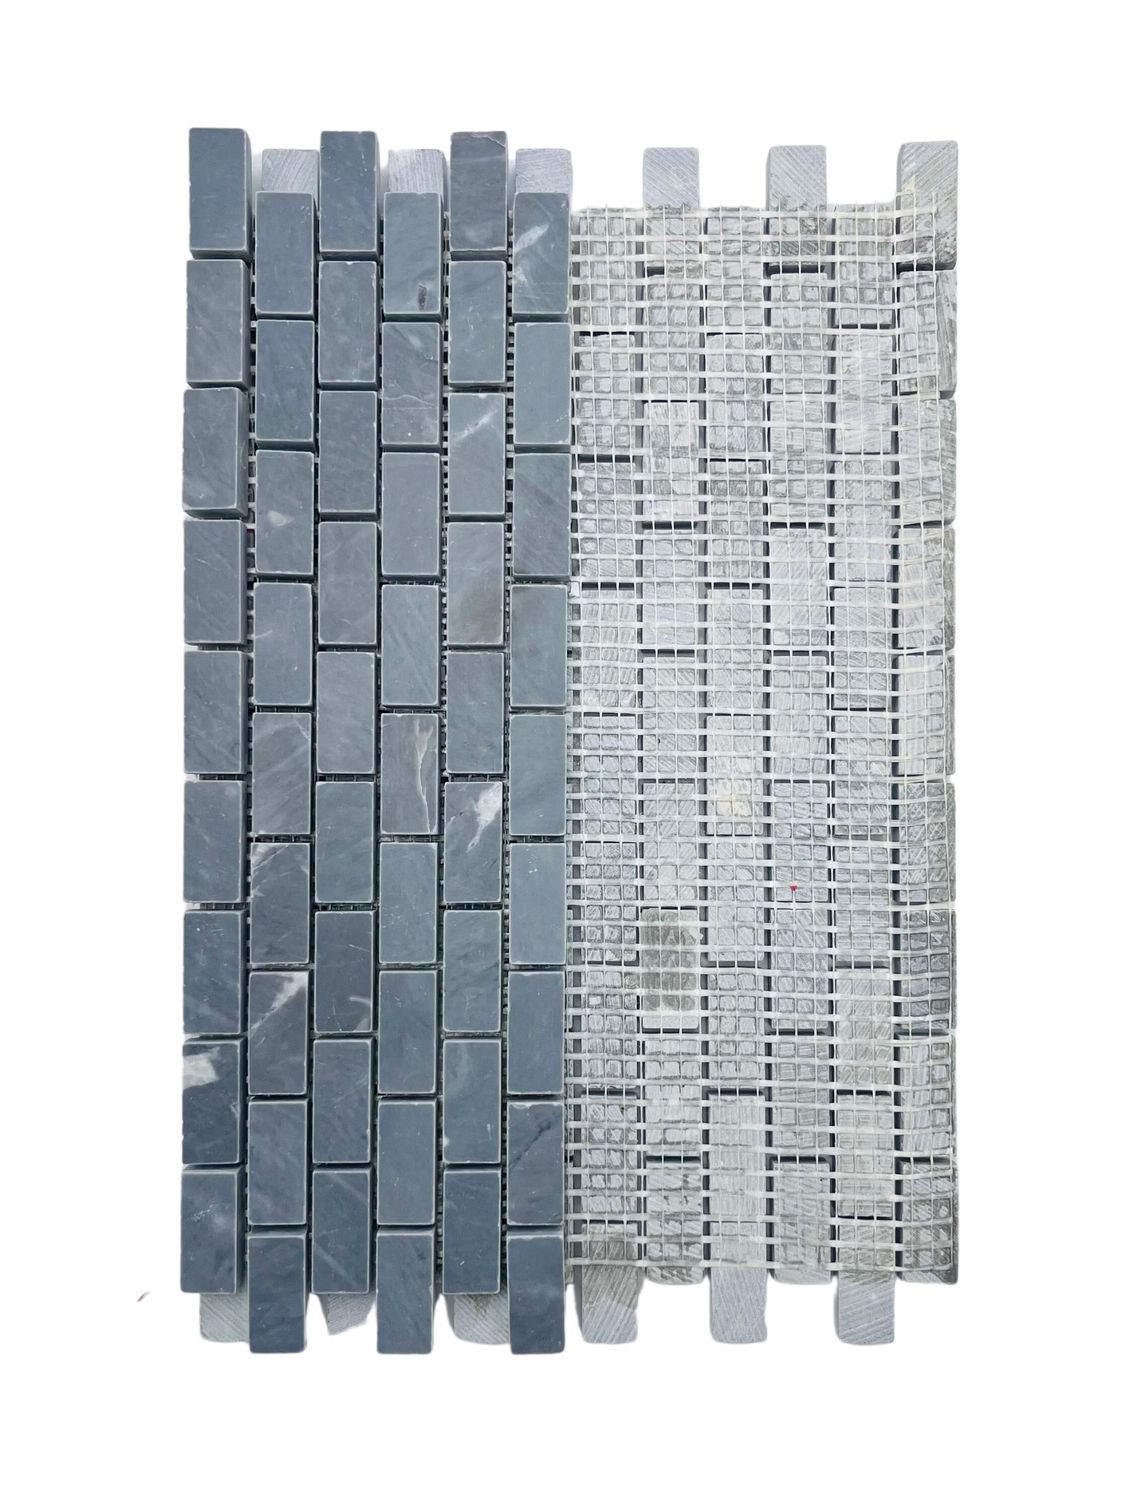 Tenedos TOTTD-BRK-1X2 Ocean Gray 1x2 Brick Honed Marble Flooring Wall Tile for Kitchen Backsplash, Bathroom Wall, Accent Wall, Fireplace Surround